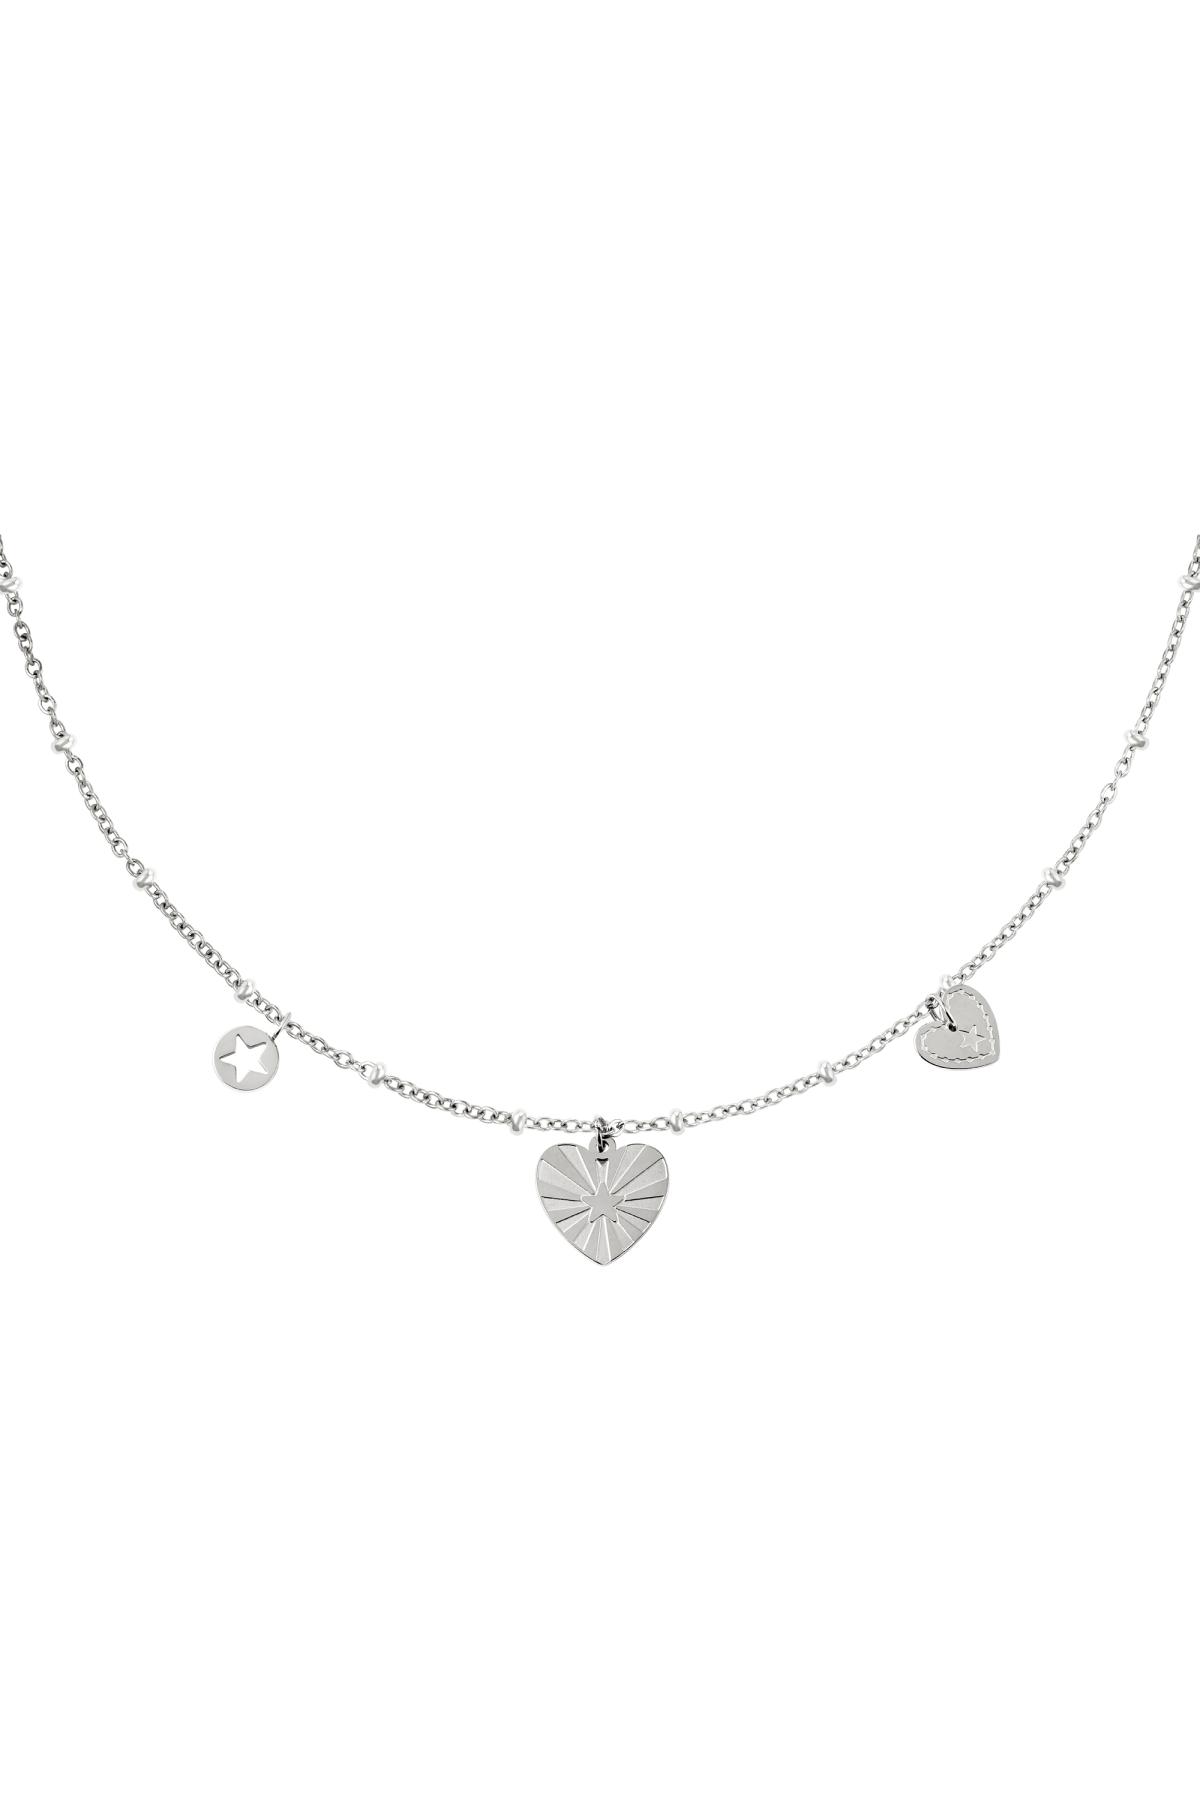 Stainless steel necklace hearts Silver